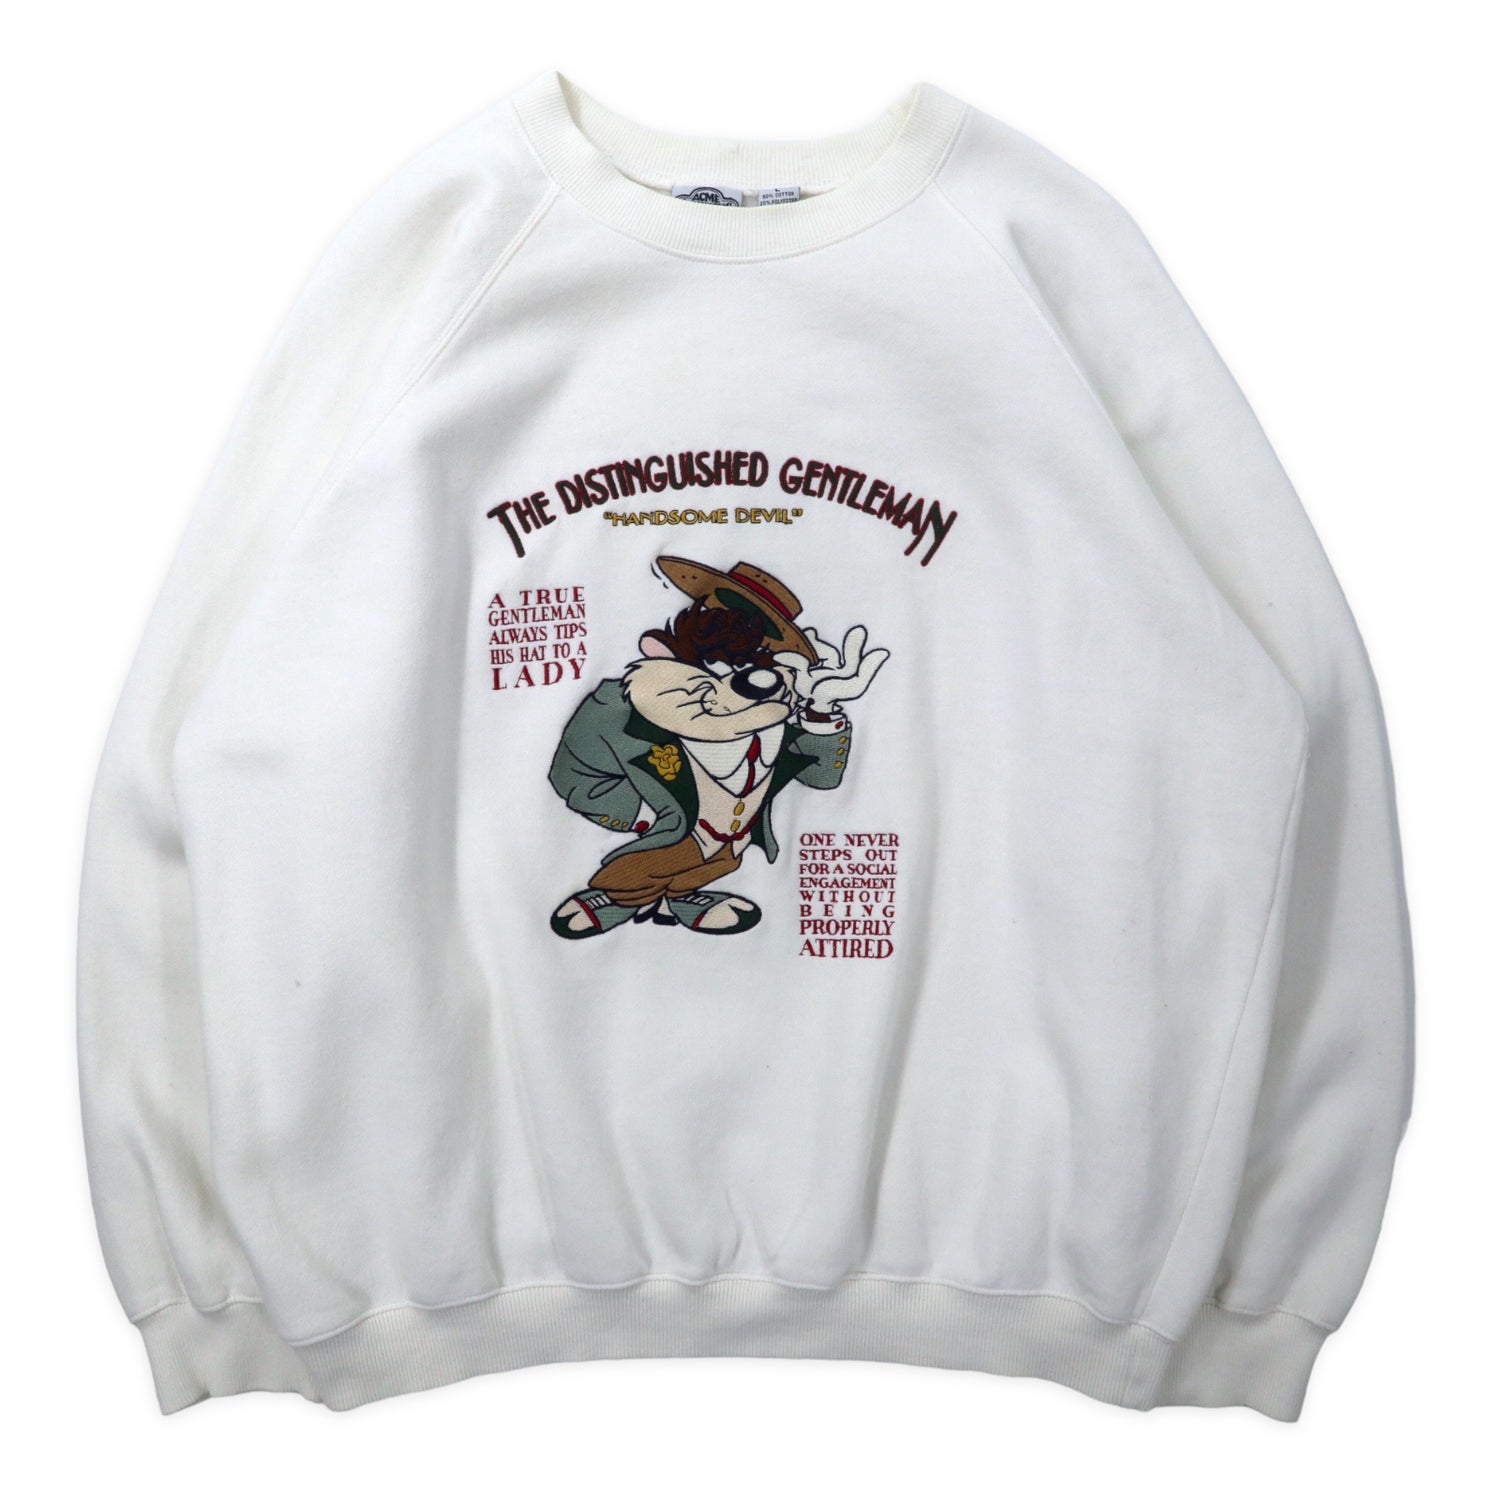 ACME Clothing x Warner Bros. 90s Rooney Tune's Character embroidery  Sweatshirt L White Cotton LOONEY TUNES